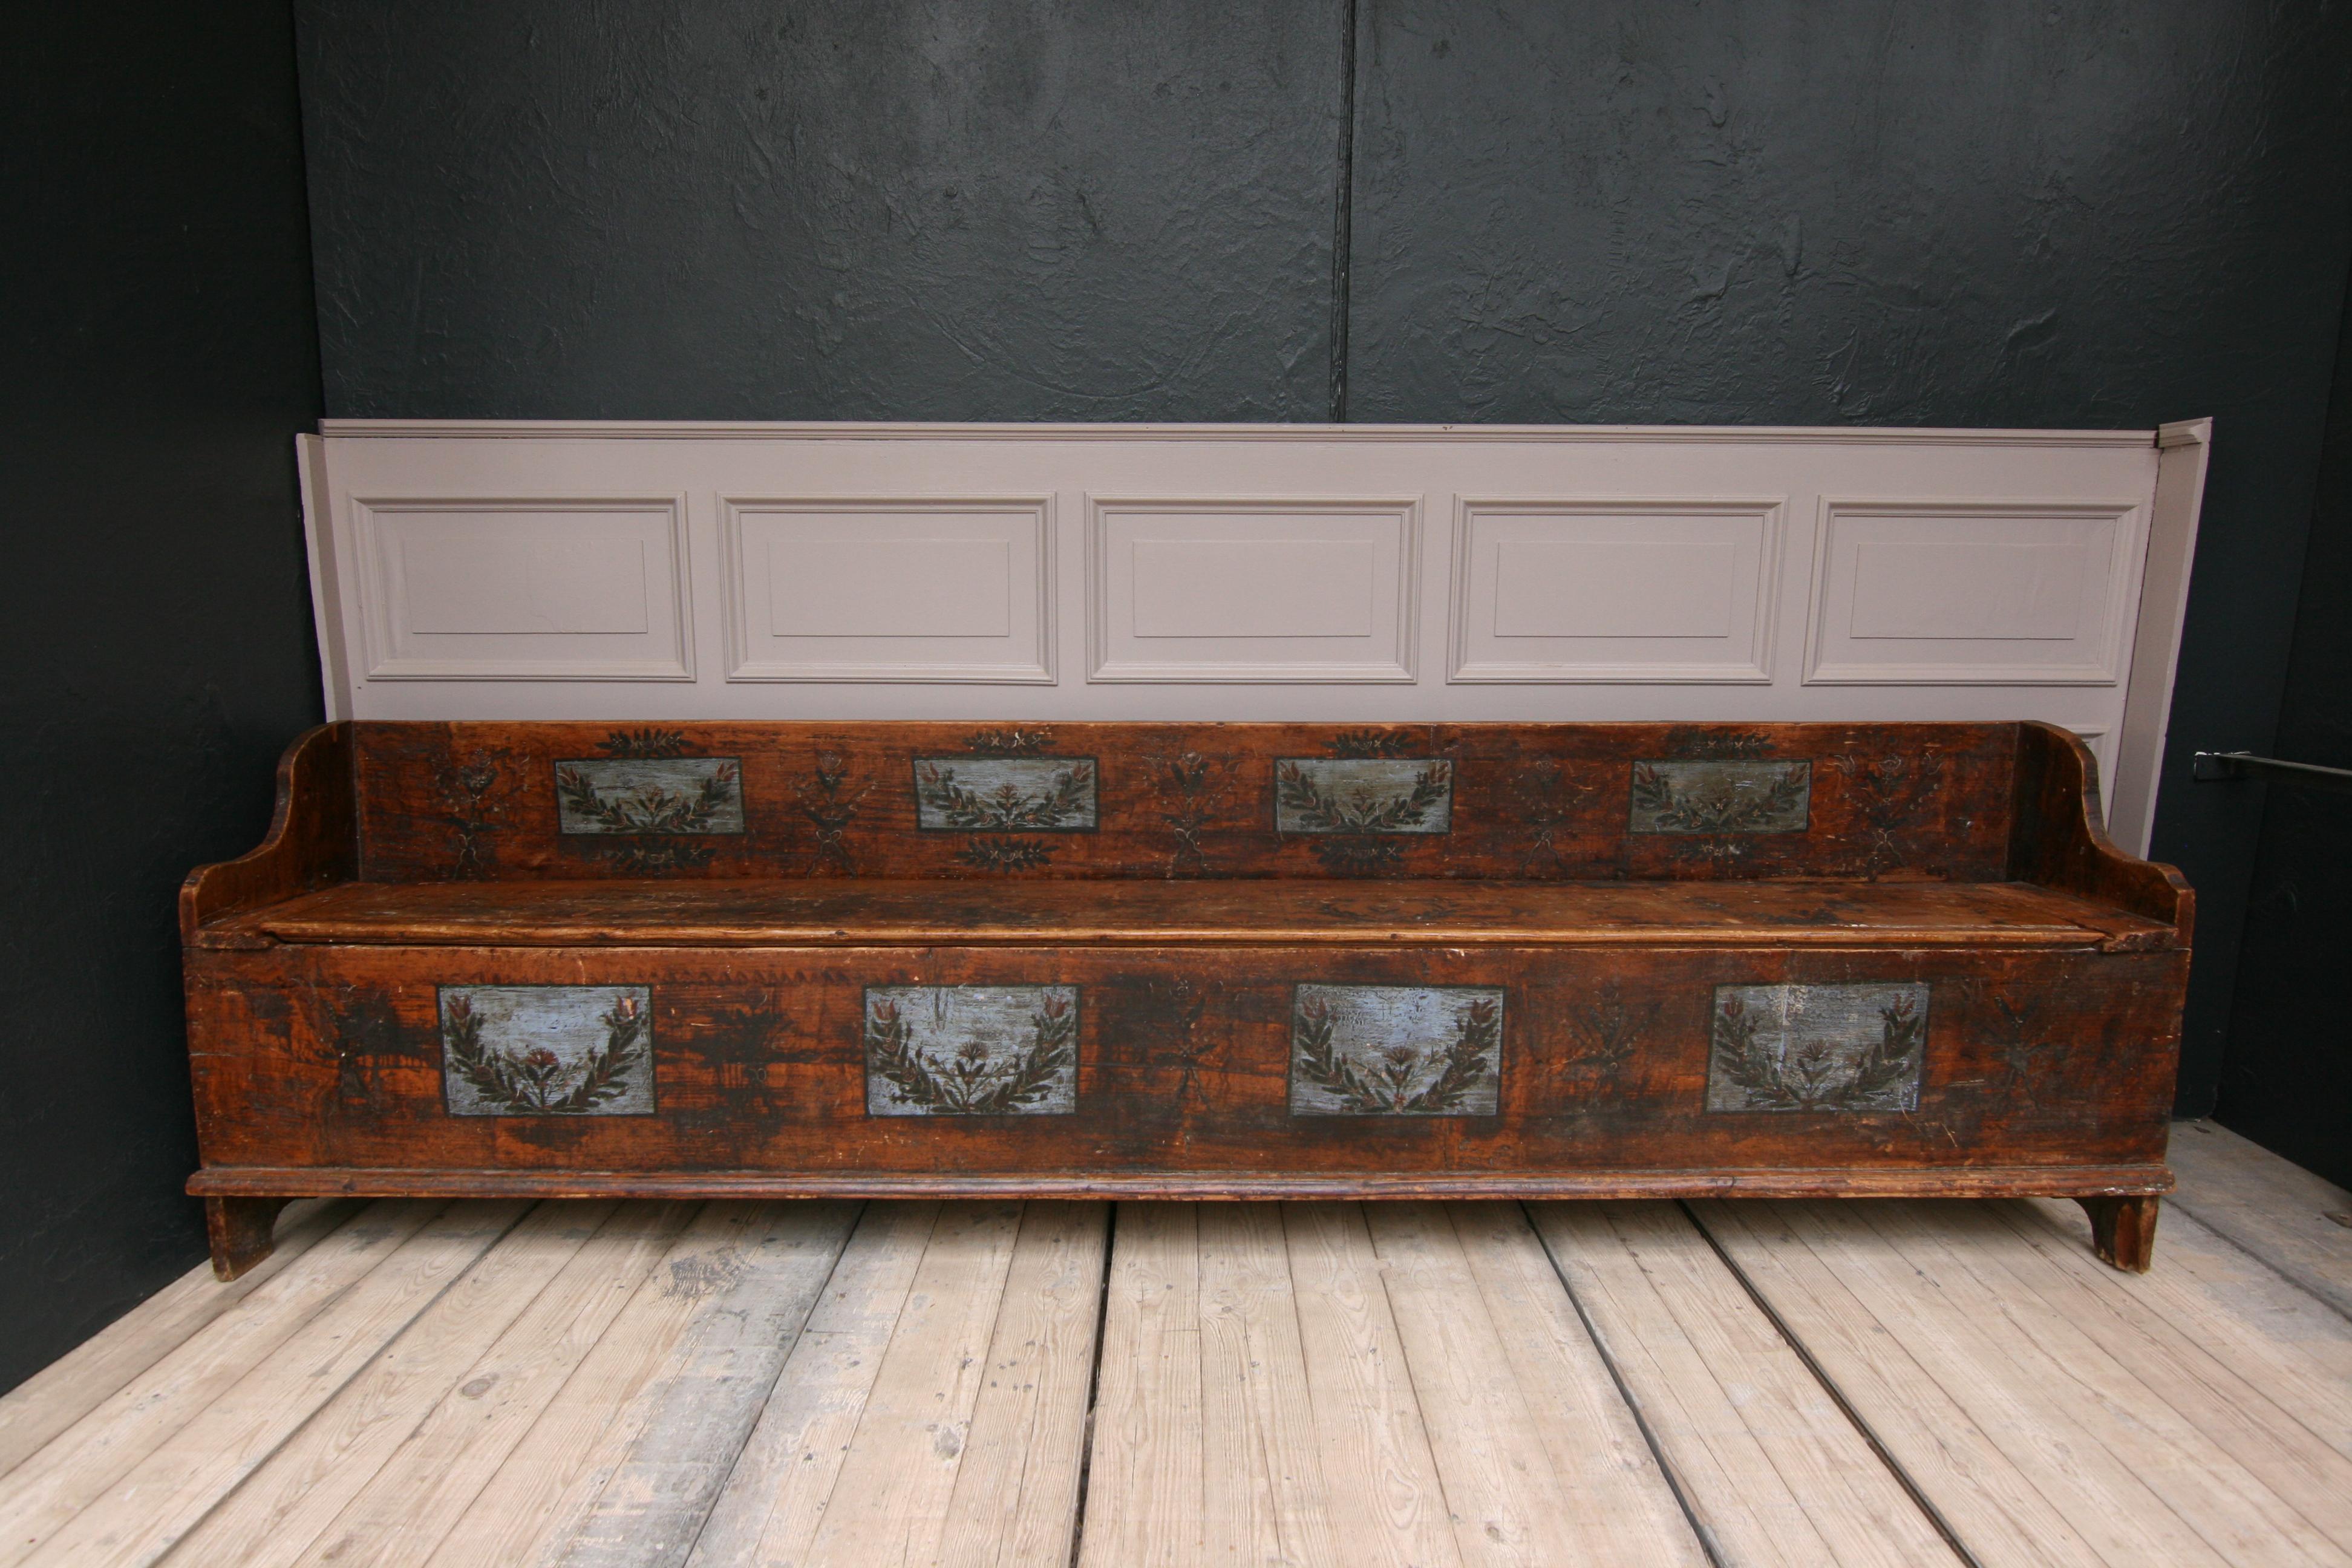 Rare original old (chest) bench from the 18th century from Dalarna in Sweden. Made from pine wood in original painting.

Dimensions: 
80,5 cm high / 31.69 inch high, 
287 cm long / 113 inch wide, 
42 cm deep / 16.54 inch deep,
Seat height: